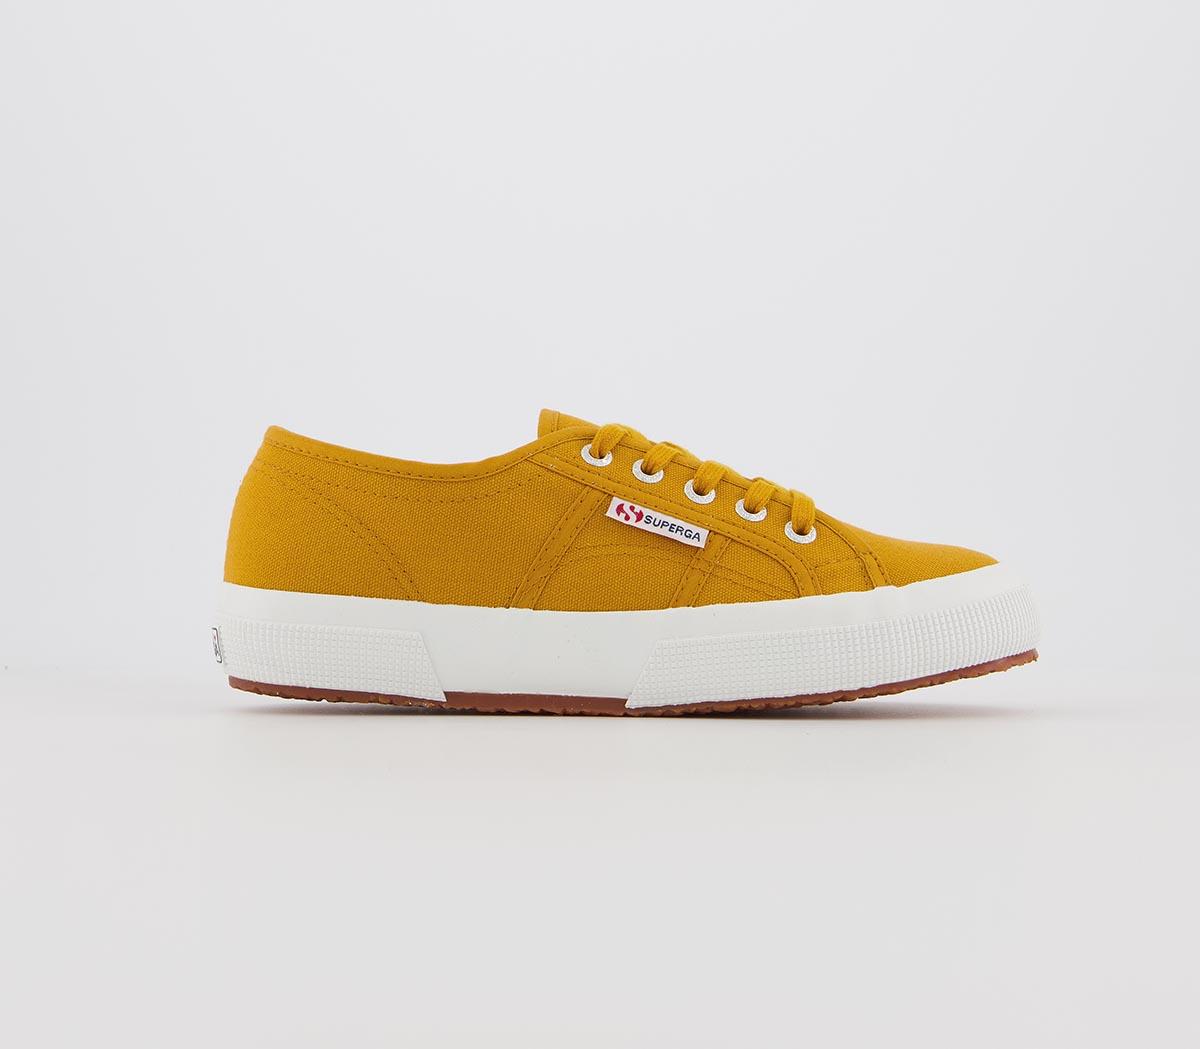 Superga 2750 Trainers Yellow Floral Exclusive - Hers trainers